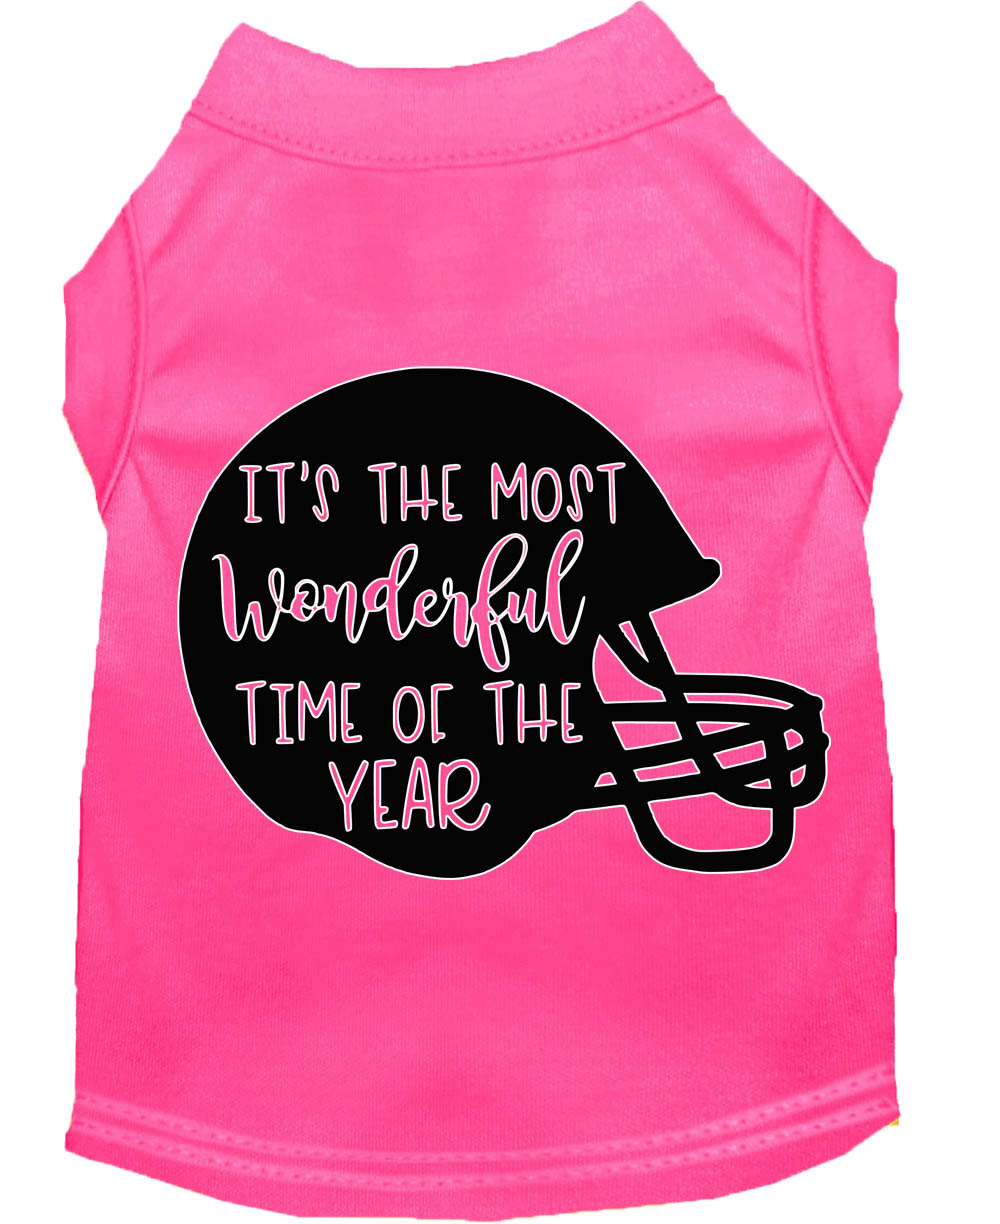 Most Wonderful Time of the Year (Football) Screen Print Dog Shirt Bright Pink XS